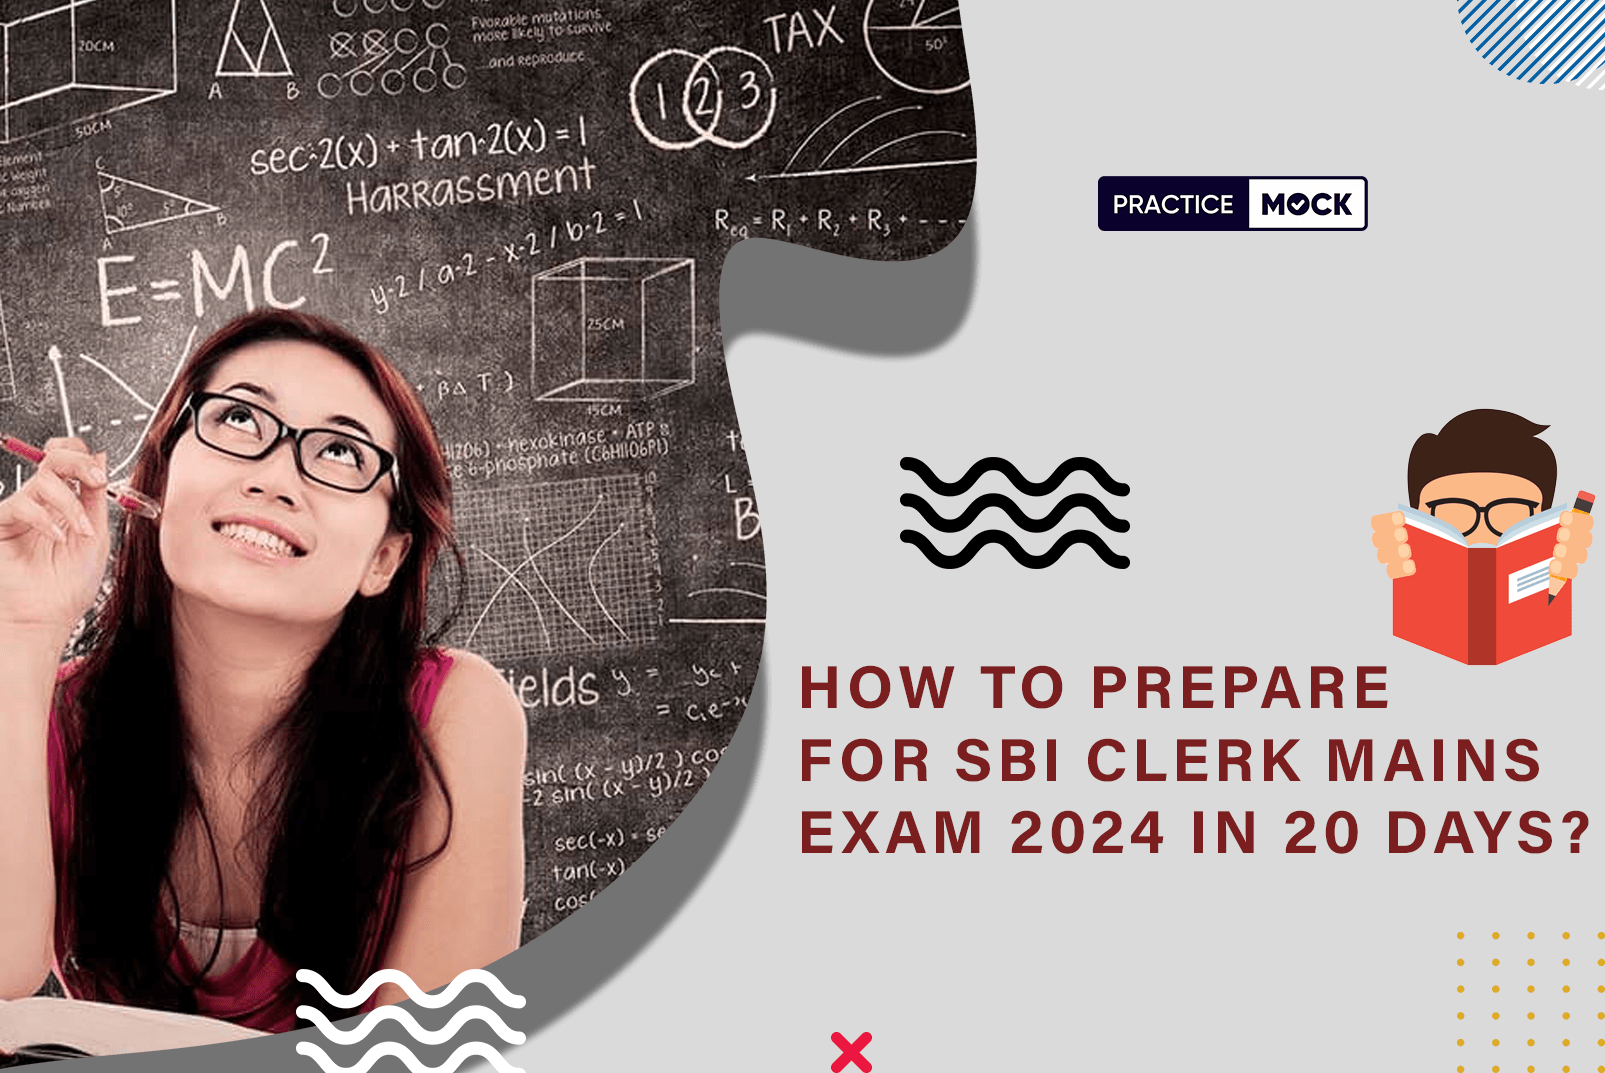 How to Prepare for SBI Clerk Mains Exam 2024 in 20 Days?